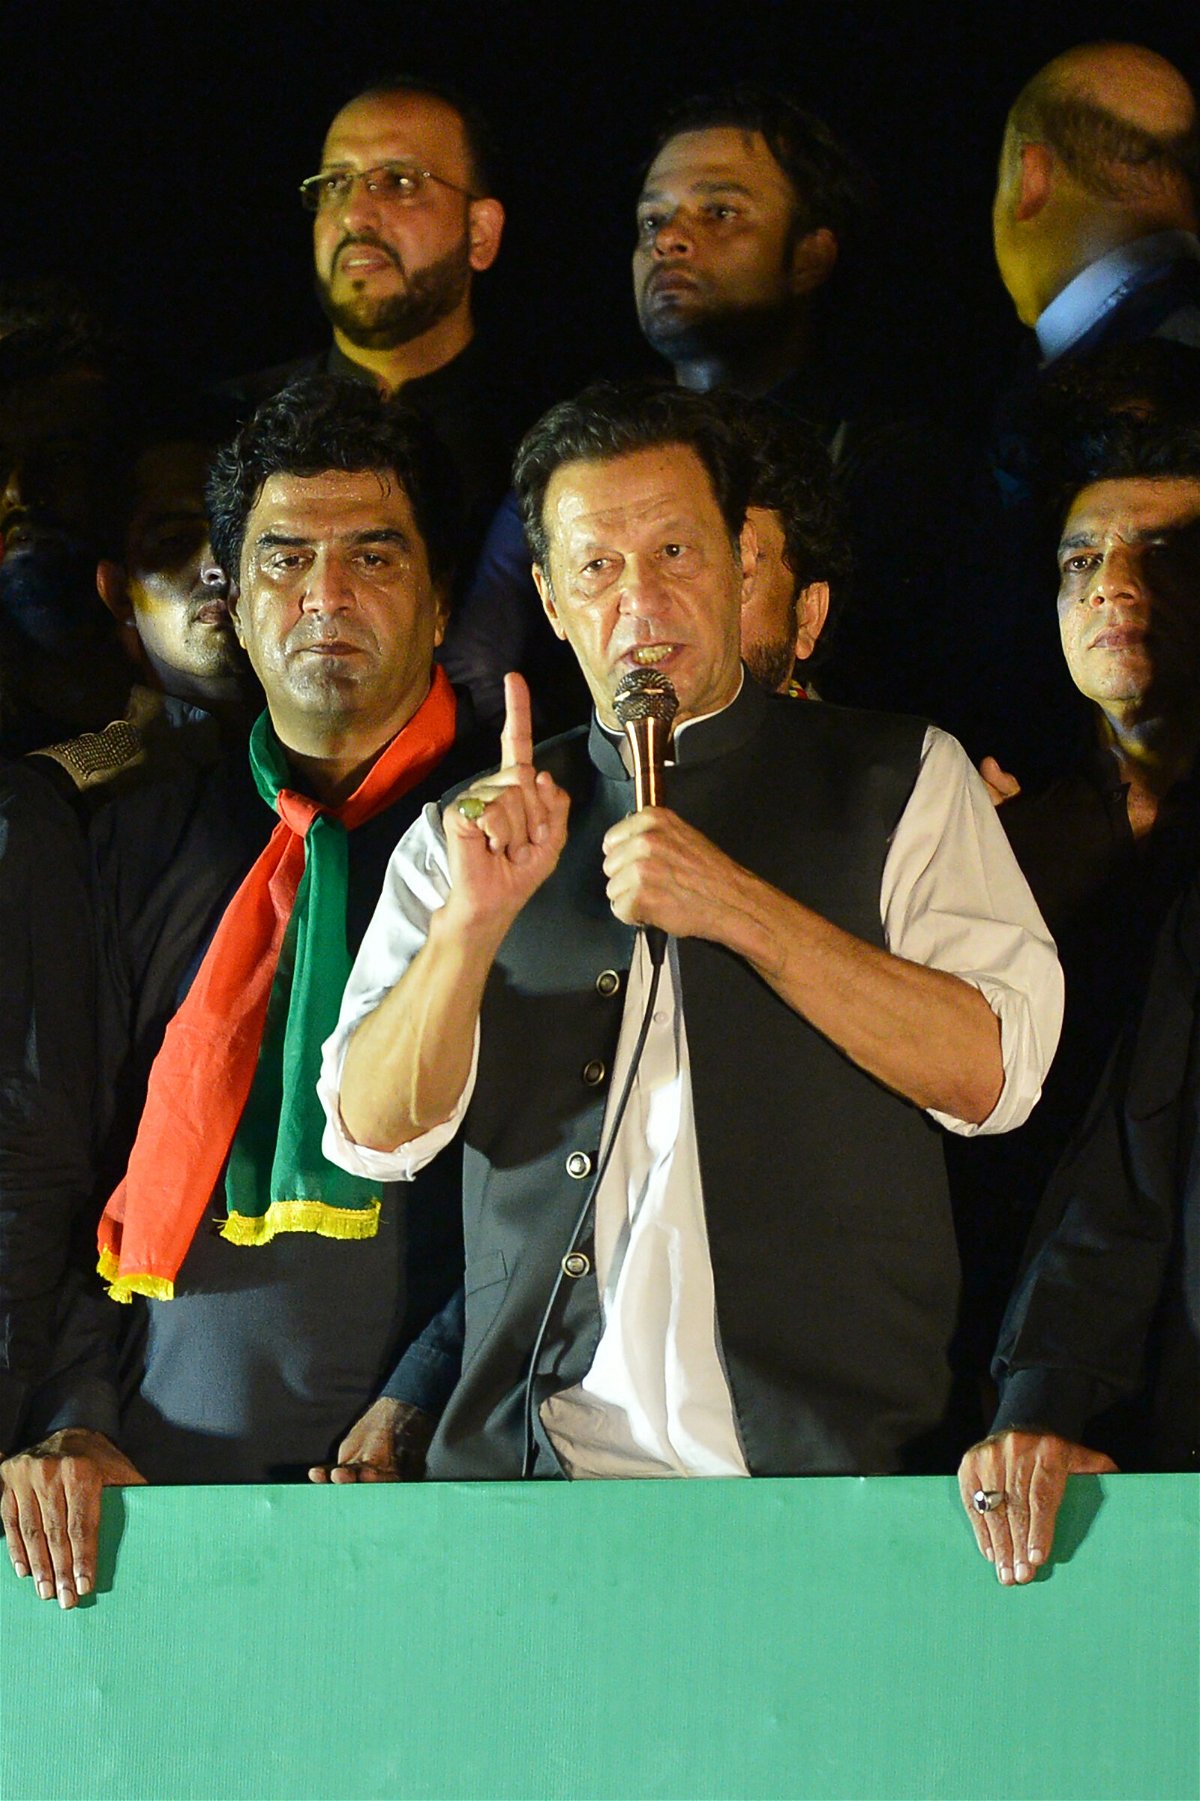 <i>Farooq Naeem/AFP/Getty Images</i><br/>Pakistan's former Prime Minister Imran Khan was granted an extension of his pre-arrest bail on August 25 while police investigate whether he violated anti-terror laws.